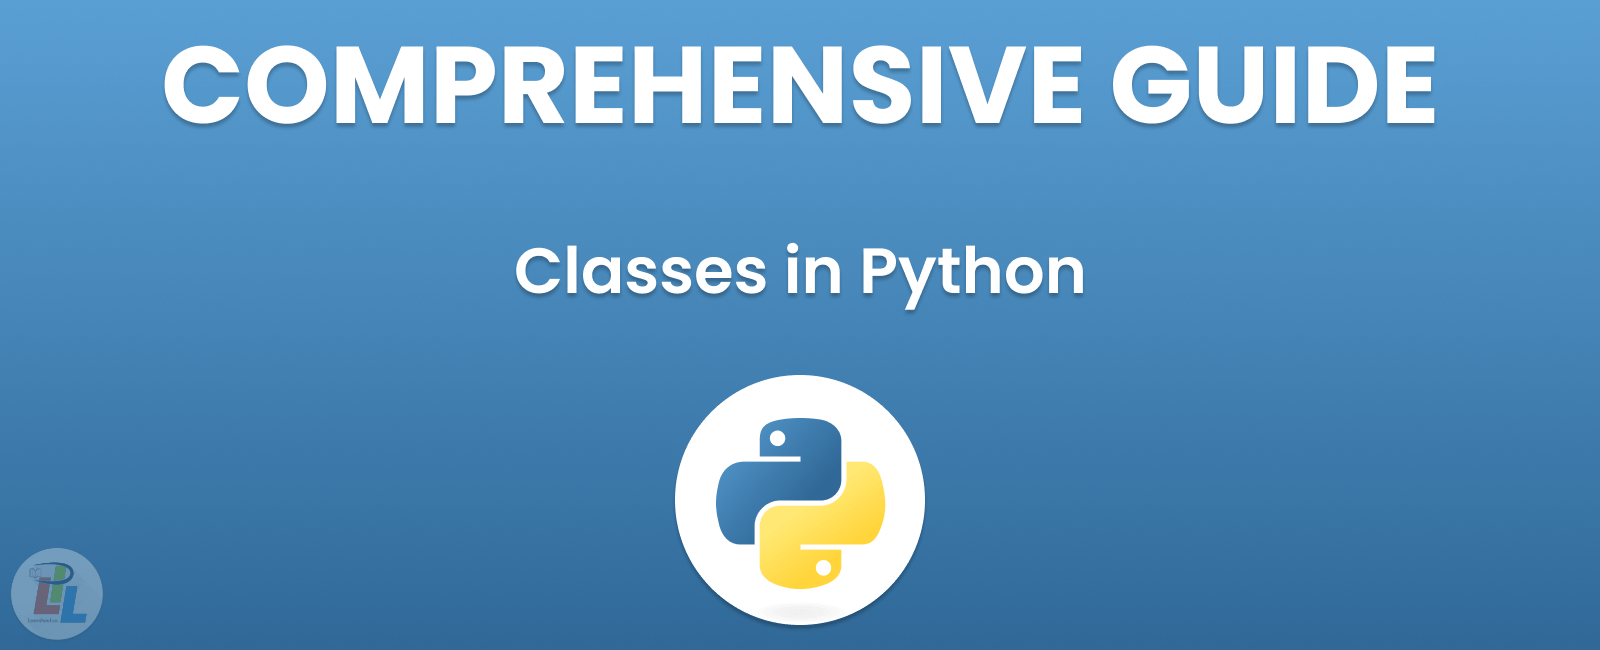 Classes in Python: A Comprehensive Guide for Beginners